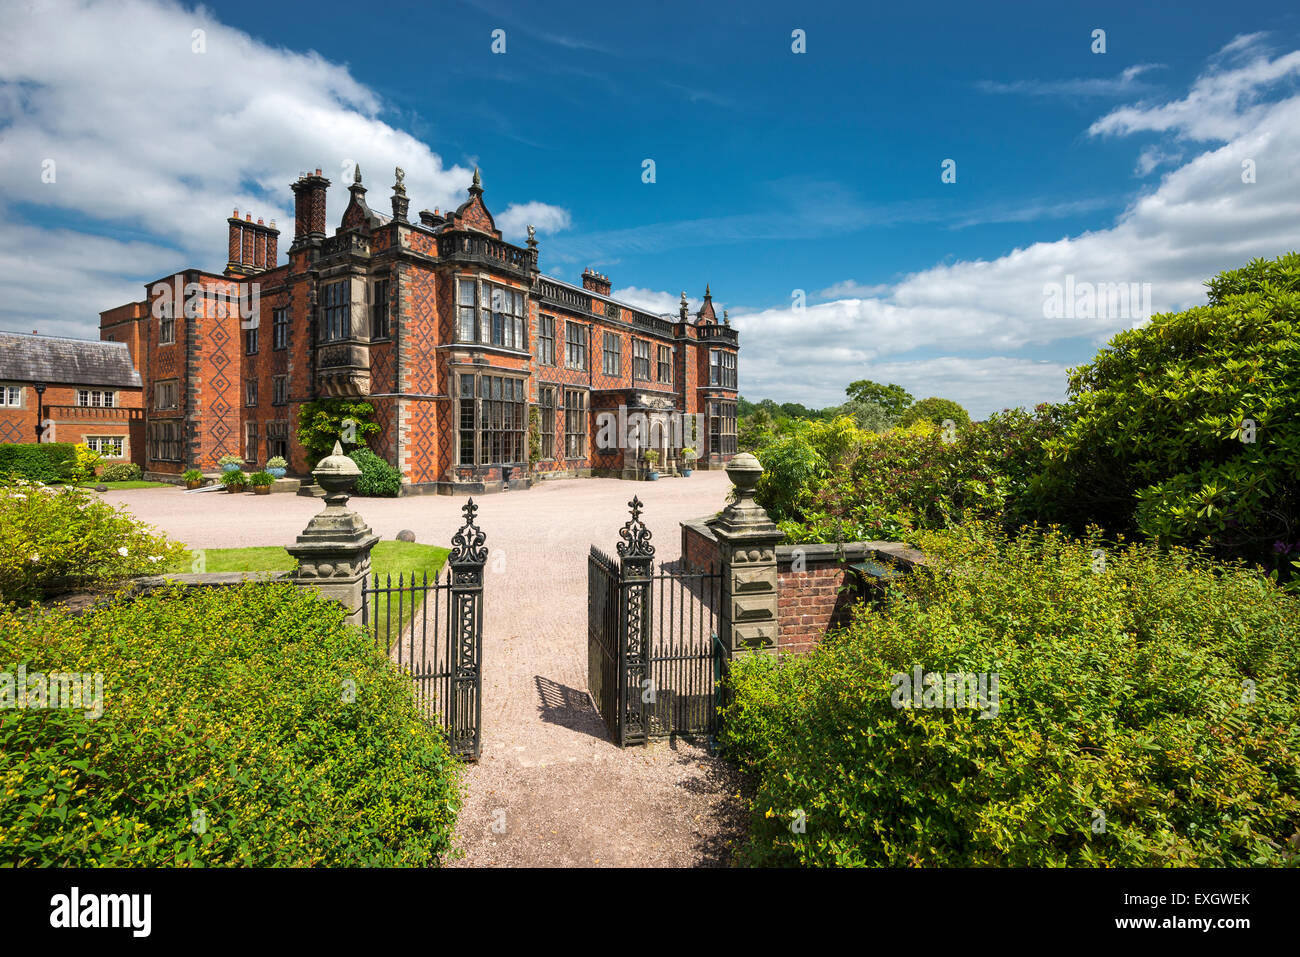 Arley Hall, a magnificent stately home in Cheshire, England. Stock Photo